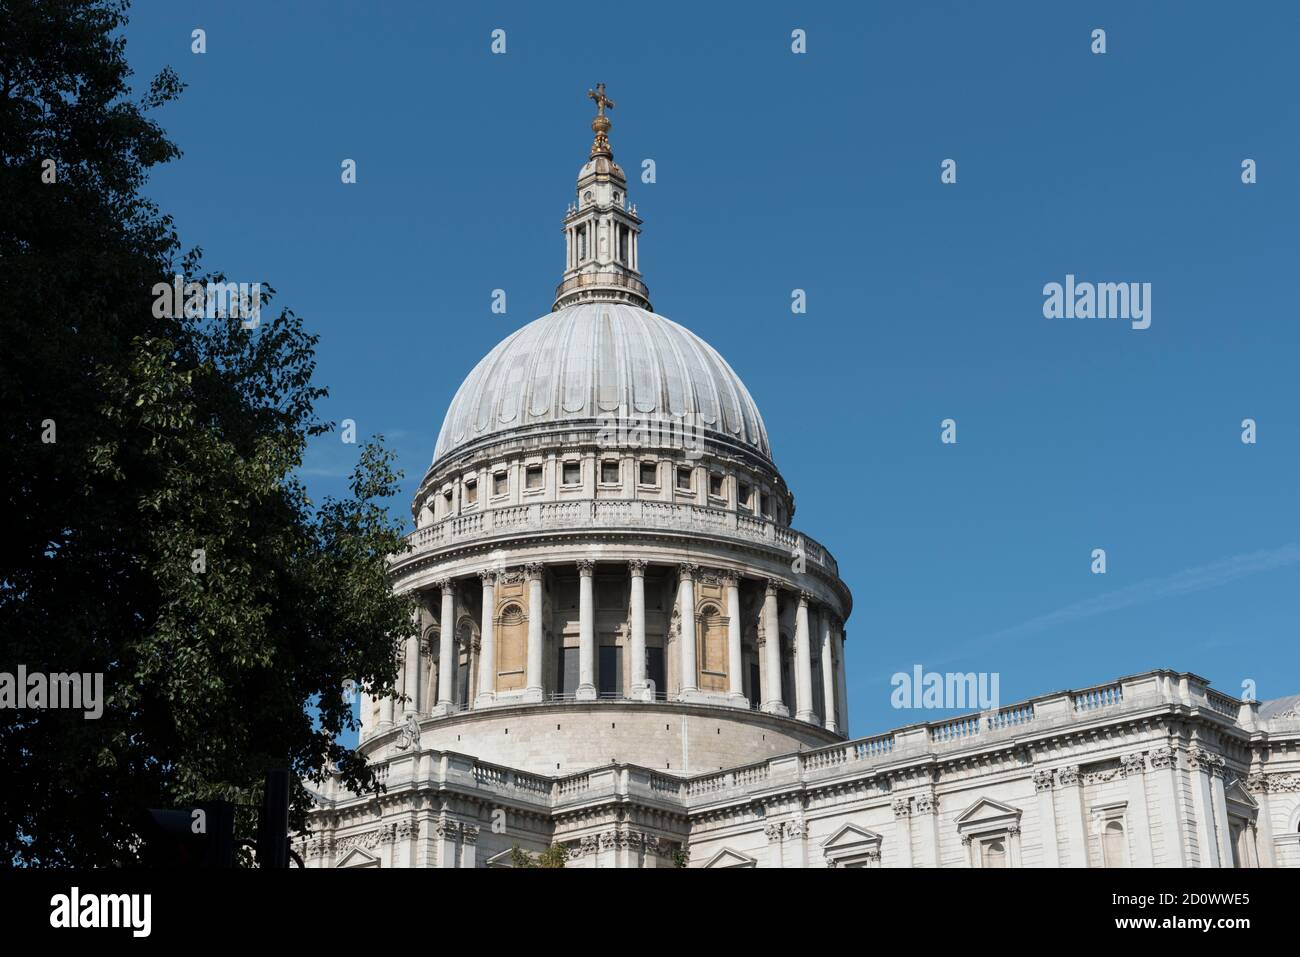 Dome of Saint Paul's Cathedral, London, EC4 Stock Photo